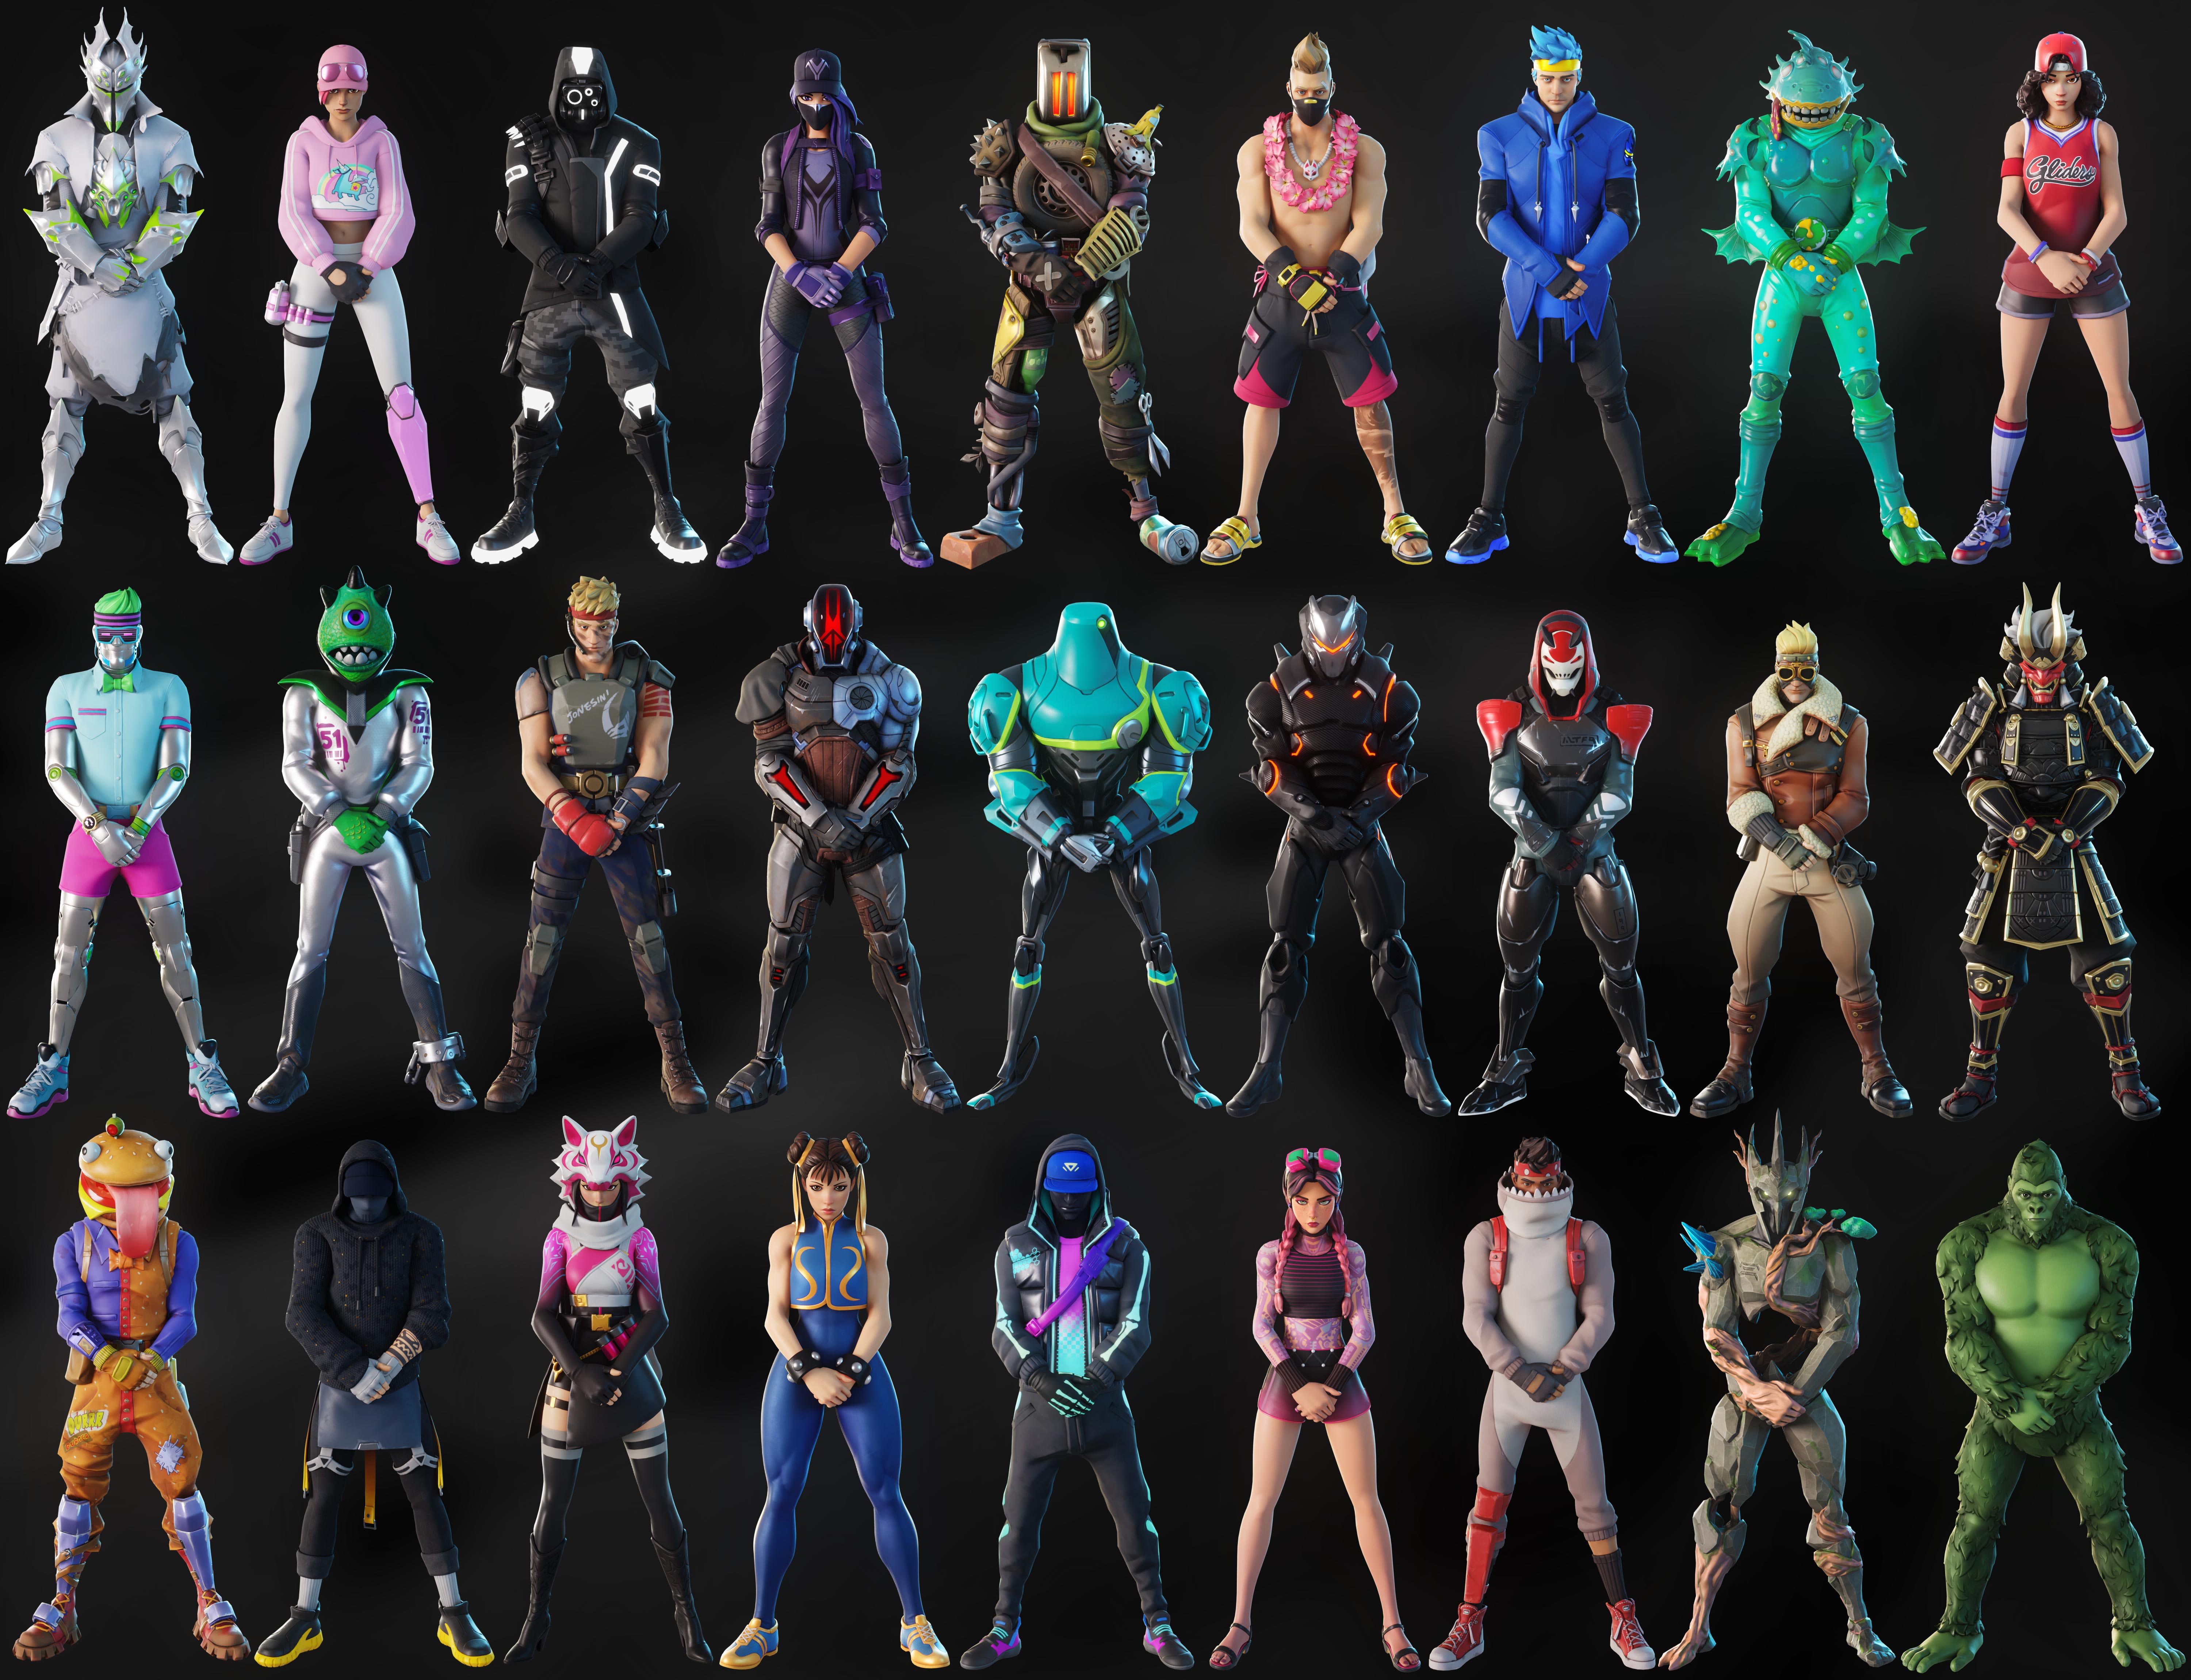 Made a stupid drip collage with some skins people requested